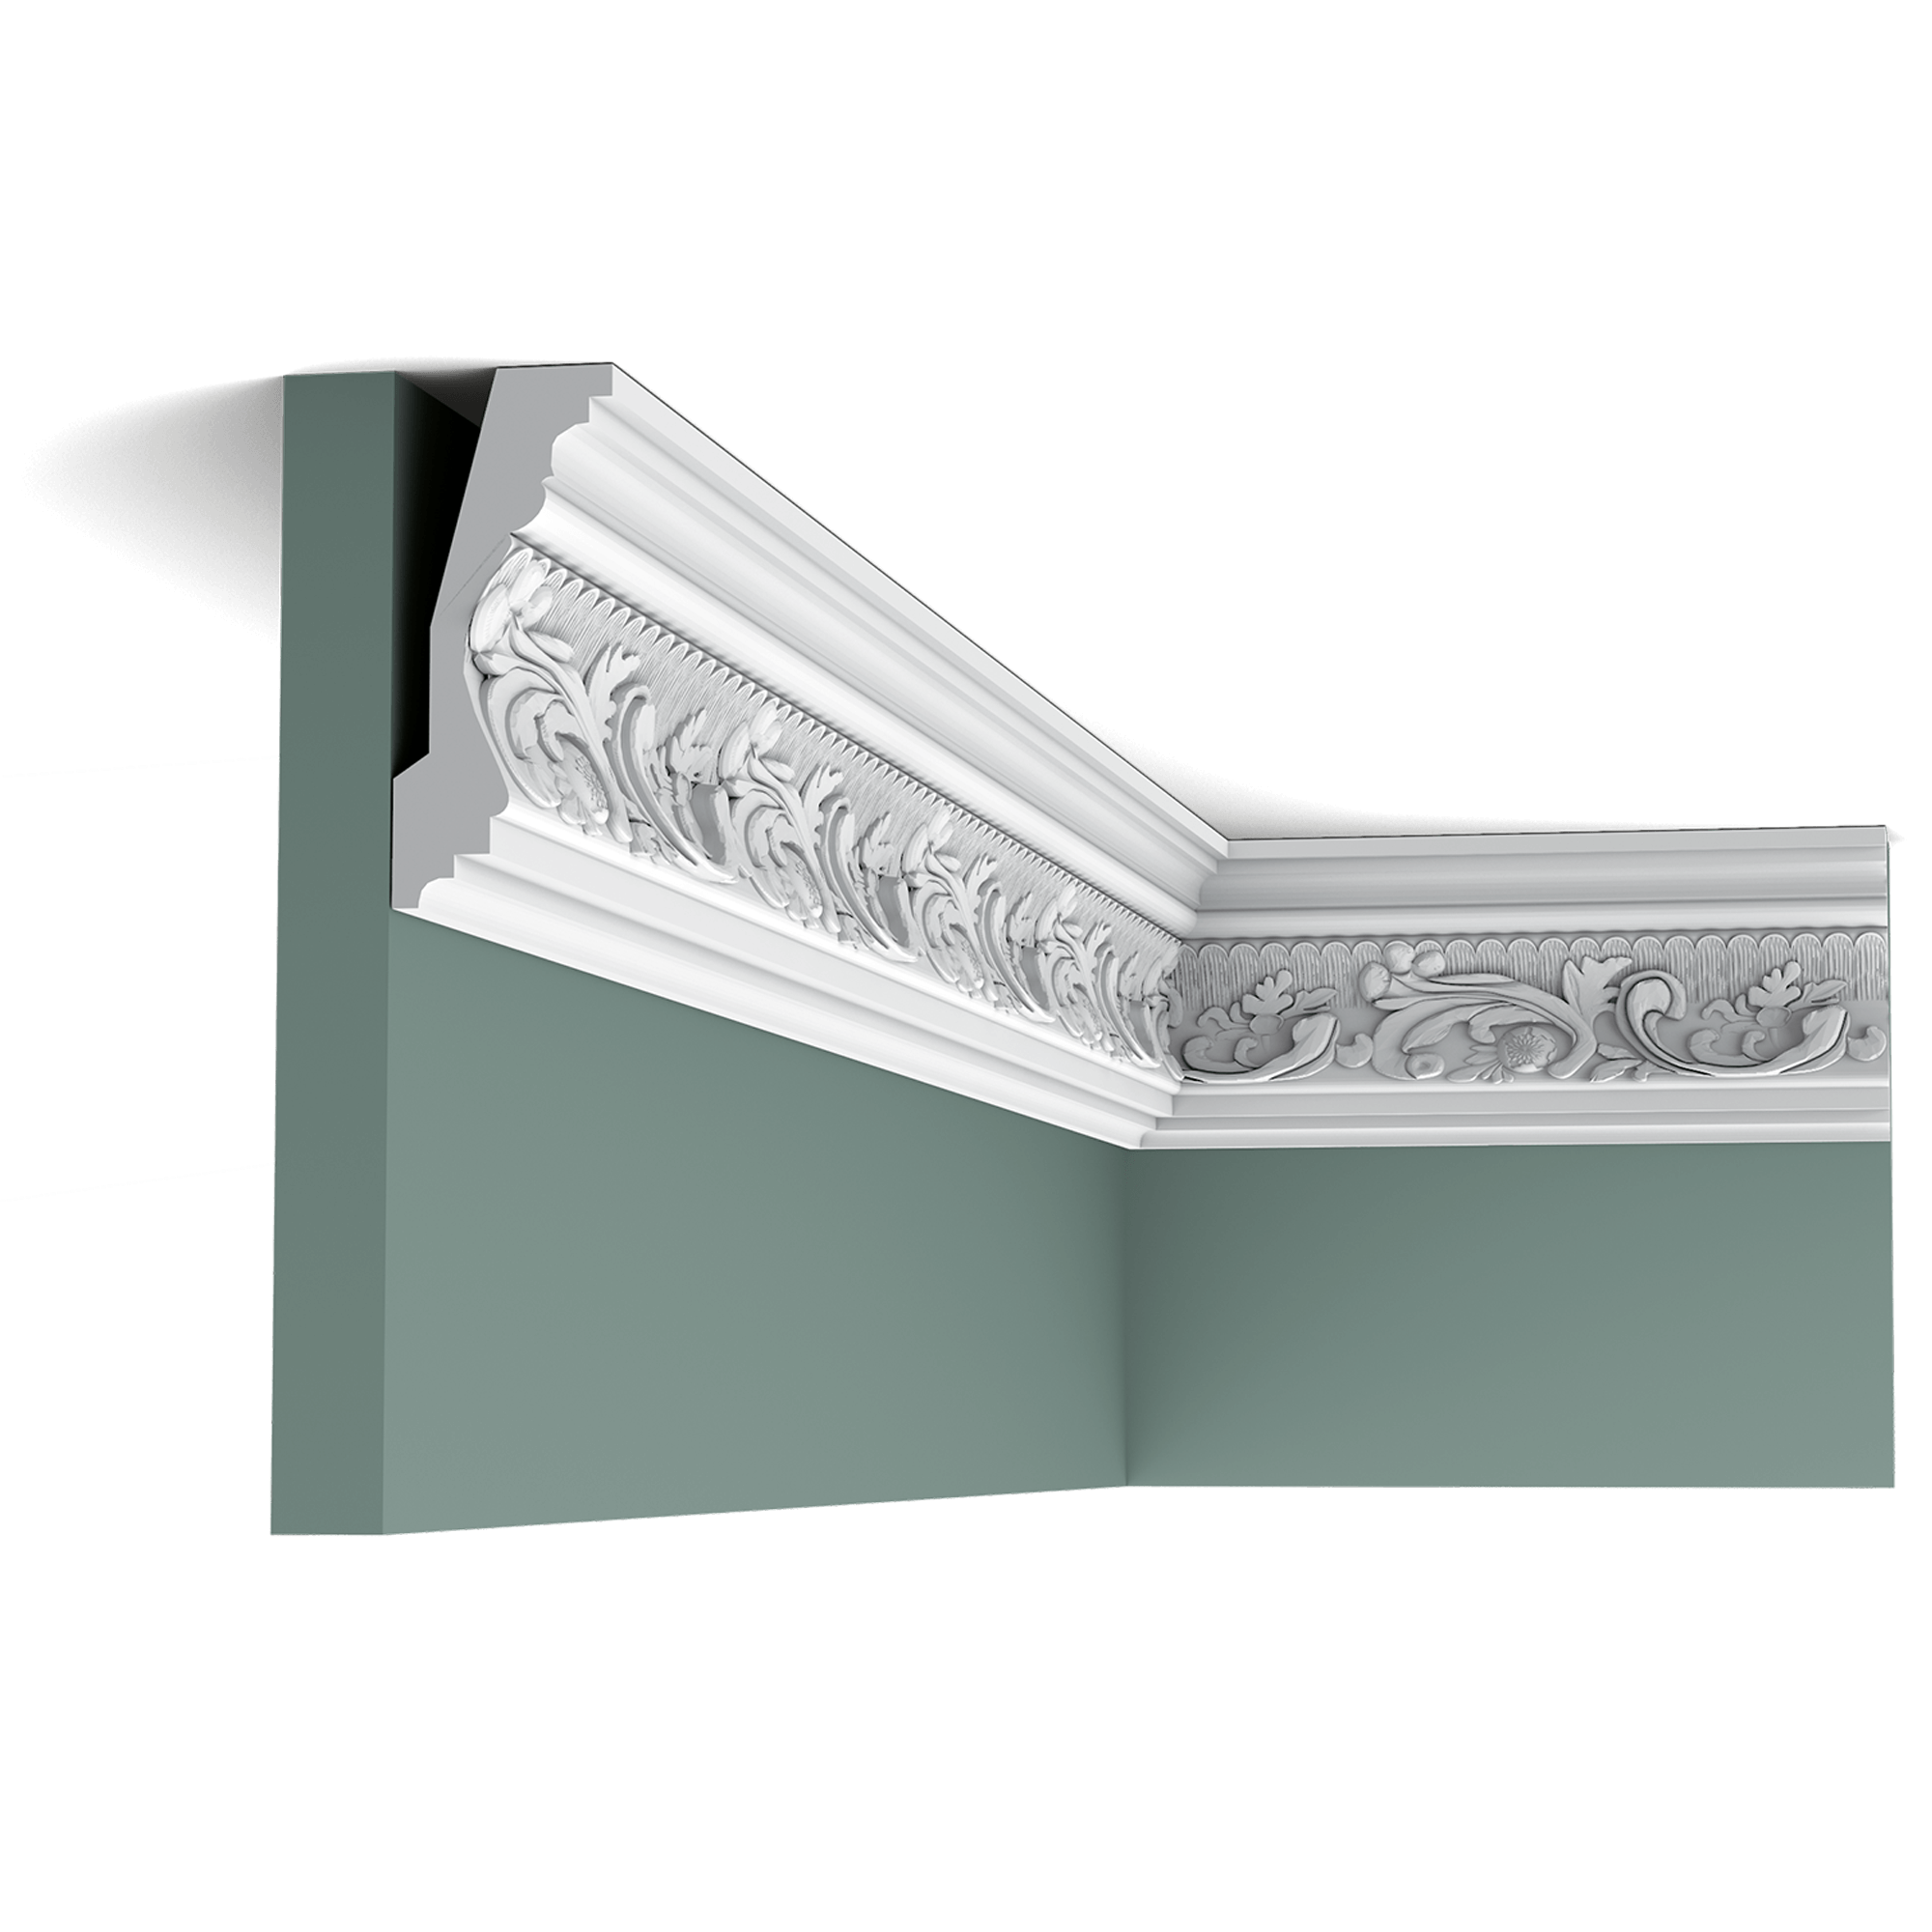 c201 border a37a Classic cornice moulding with detailed pattern of foliage. This moulding will become an eye-catching focus of your interior.